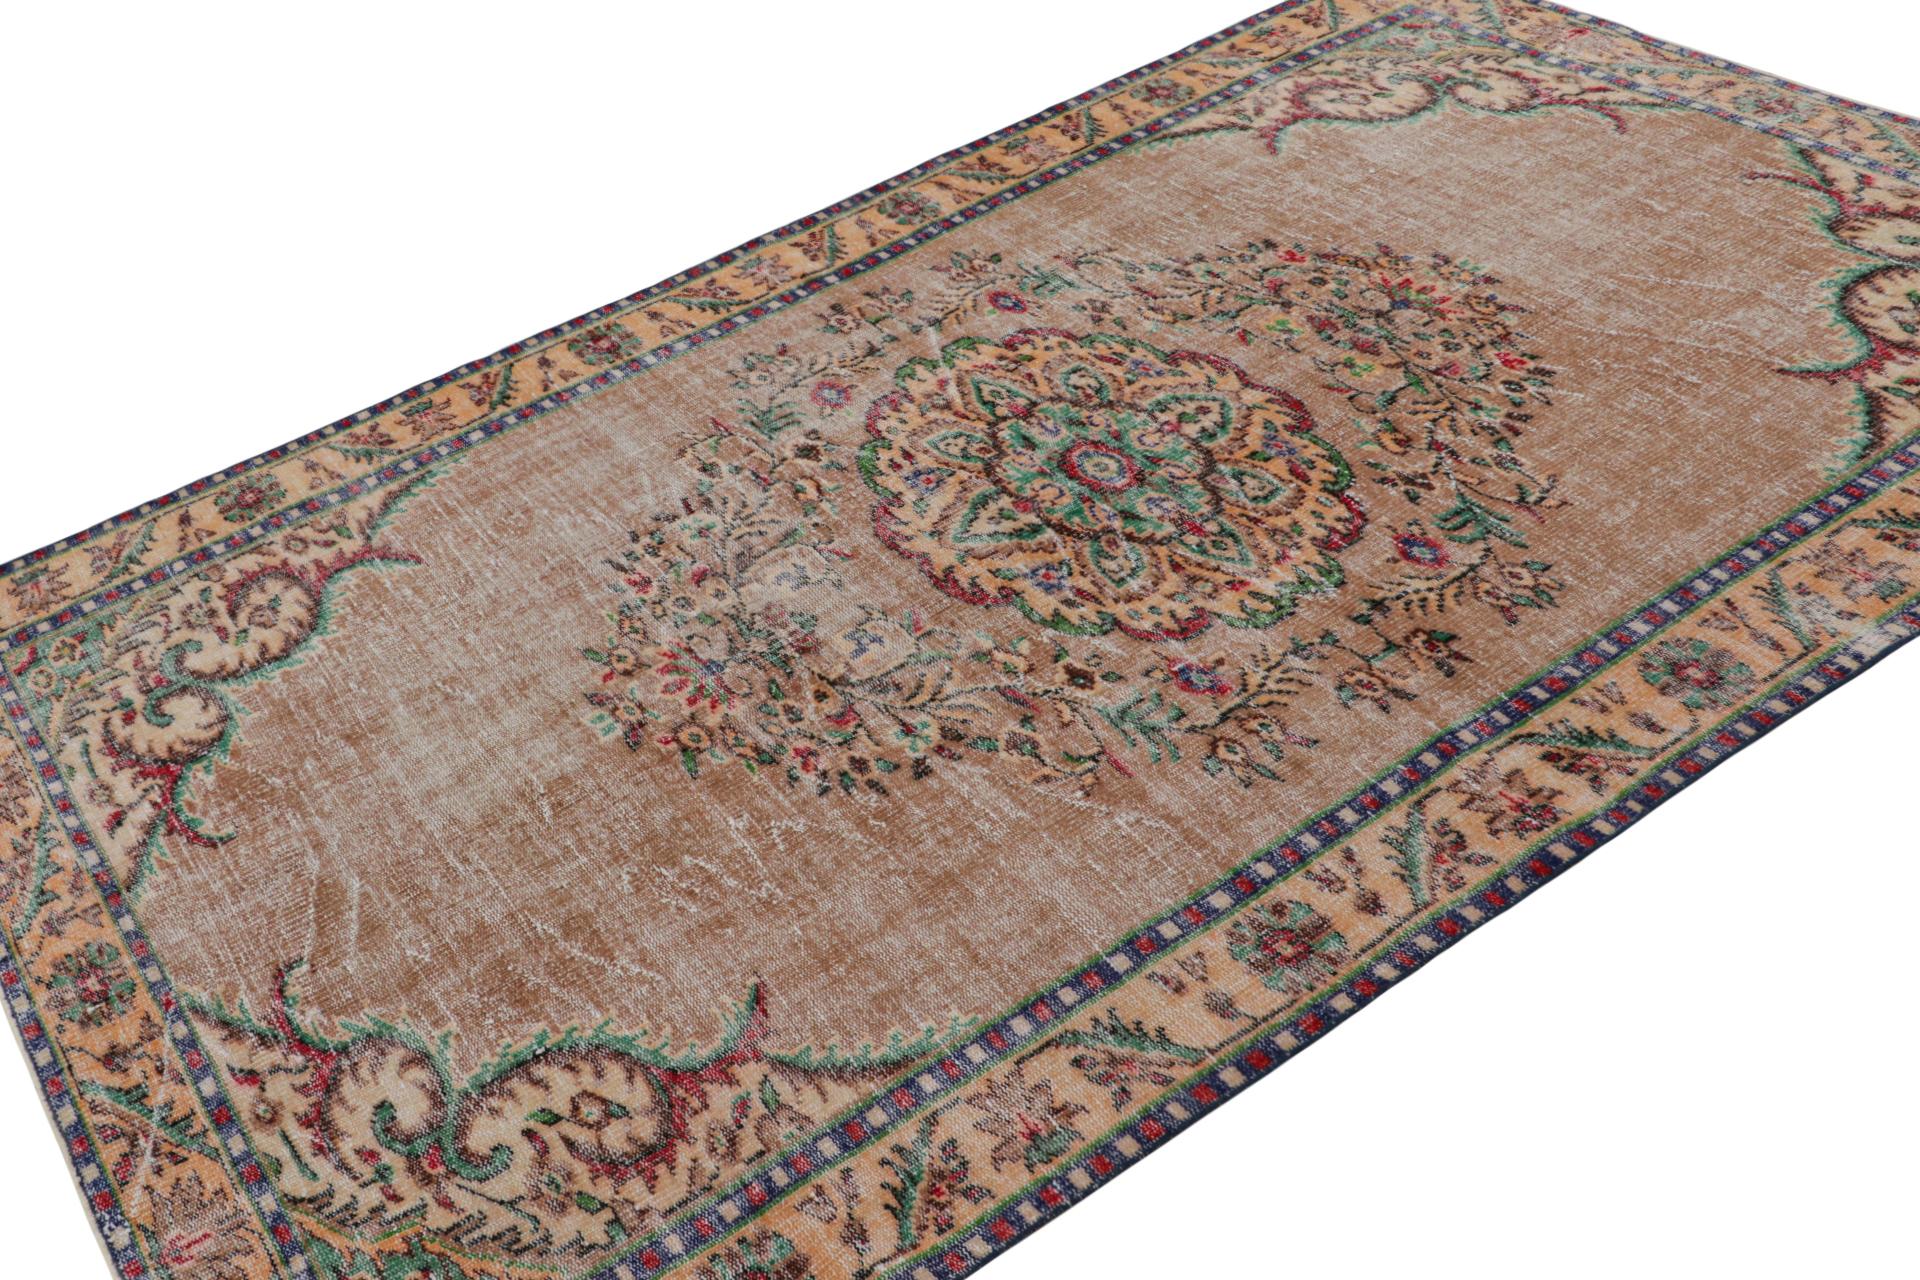 This vintage 6x9 Zeki Müren European style rug, hand-knotted in wool, circa 1960-1970, has been inspired by Savonnerie, Aubusson, and even Persian rugs in some of its elements—interesting confluence of styles with subversive colors, all hallmarks of